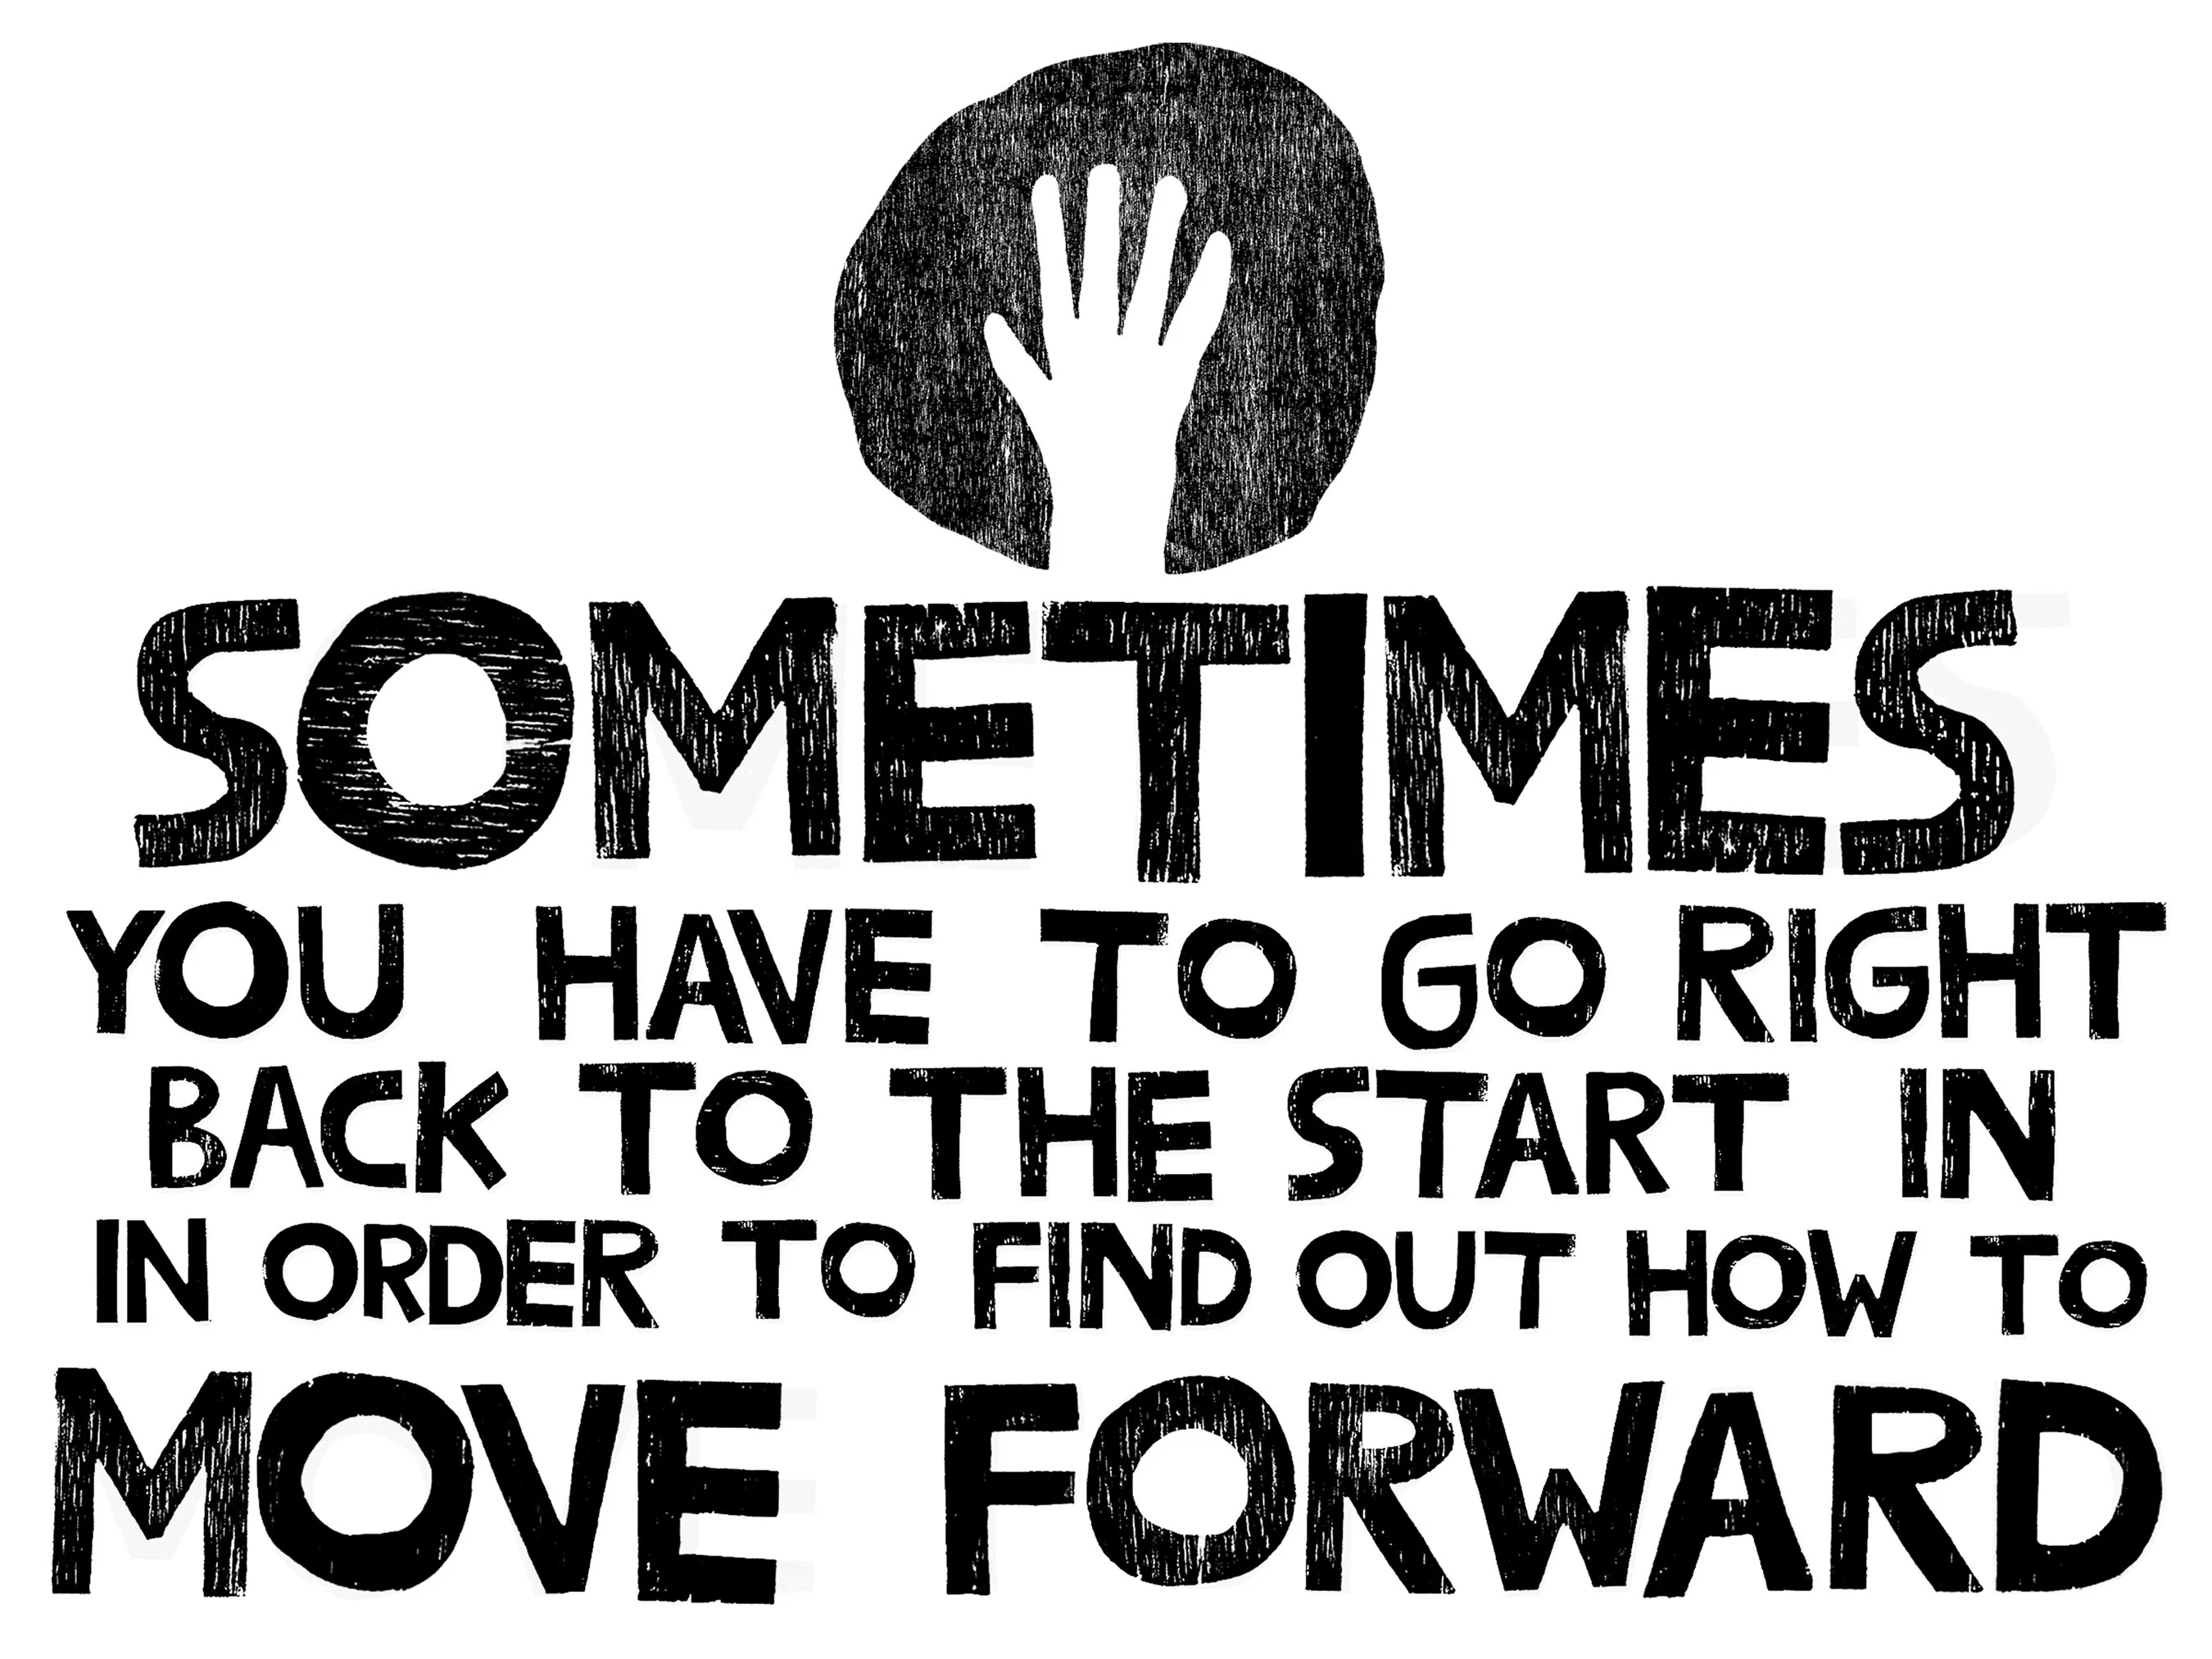 Sometimes you have to go right back to the start in order to find out how to move forward.